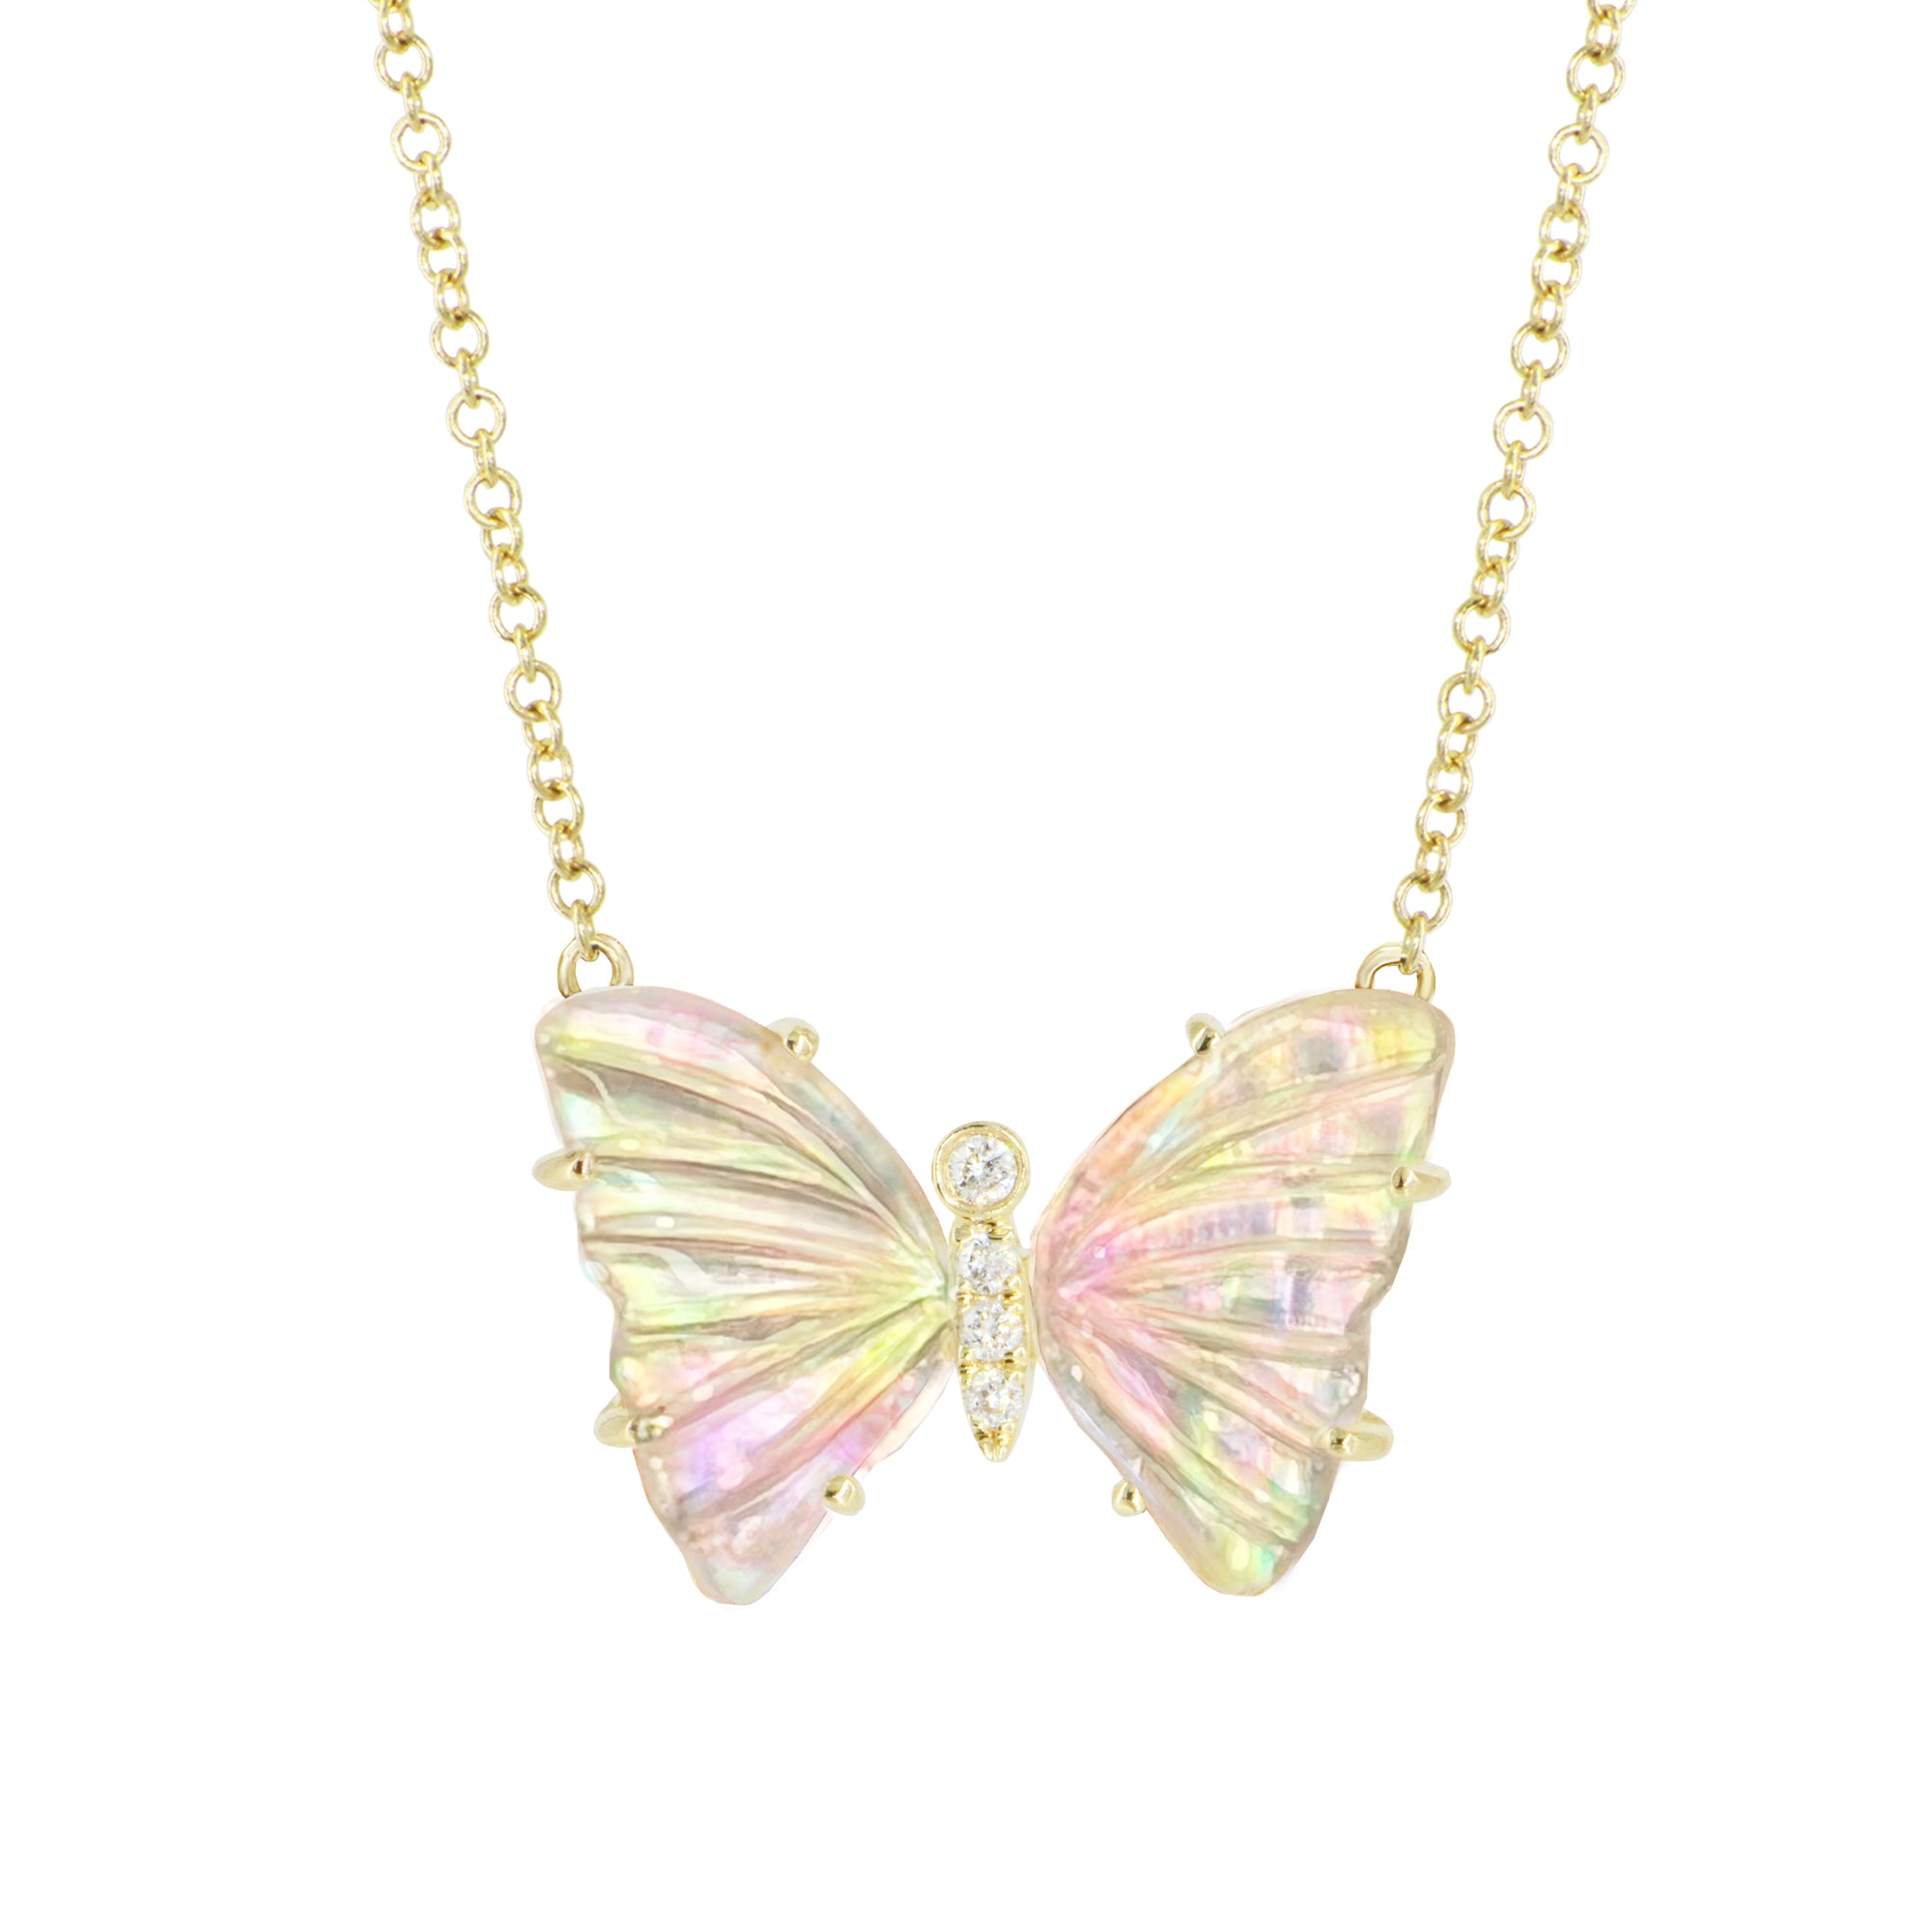 Multicolored Pearl Butterfly Necklace with Diamonds and Prongs